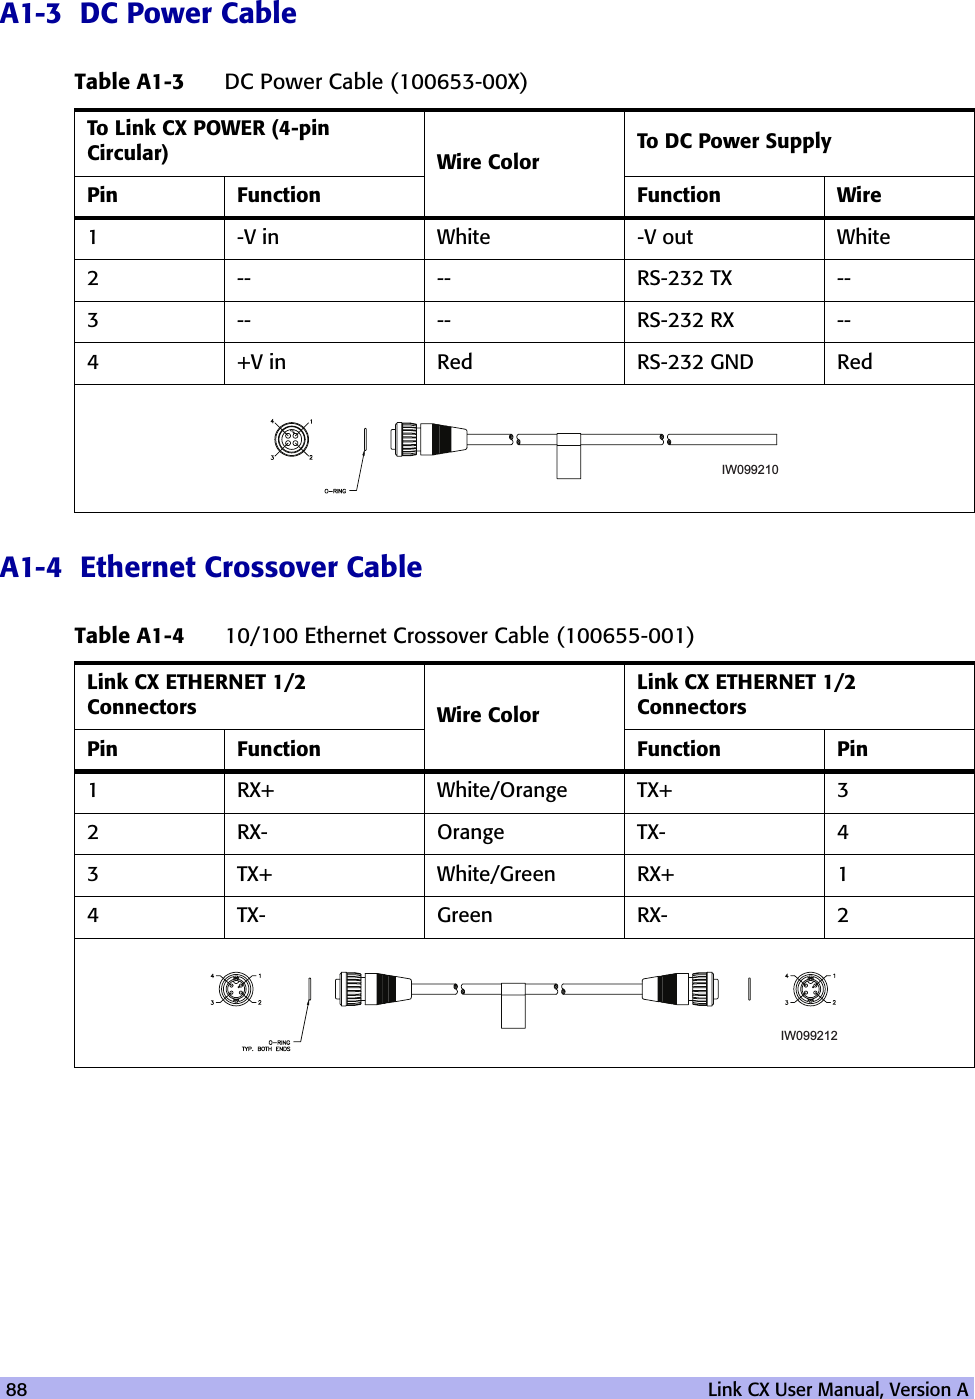 88   Link CX User Manual, Version AA1-3  DC Power CableA1-4  Ethernet Crossover CableTable A1-3 DC Power Cable (100653-00X)To Link CX POWER (4-pin Circular)  Wire Color To DC Power SupplyPin Function Function Wire1 -V in White -V out White2----RS-232 TX--3----RS-232 RX--4 +V in Red RS-232 GND RedTable A1-4 10/100 Ethernet Crossover Cable (100655-001)Link CX ETHERNET 1/2 Connectors Wire ColorLink CX ETHERNET 1/2 ConnectorsPin Function Function Pin1 RX+ White/Orange TX+ 32 RX- Orange TX- 43 TX+ White/Green RX+ 14 TX- Green RX- 2IW099210IW099212